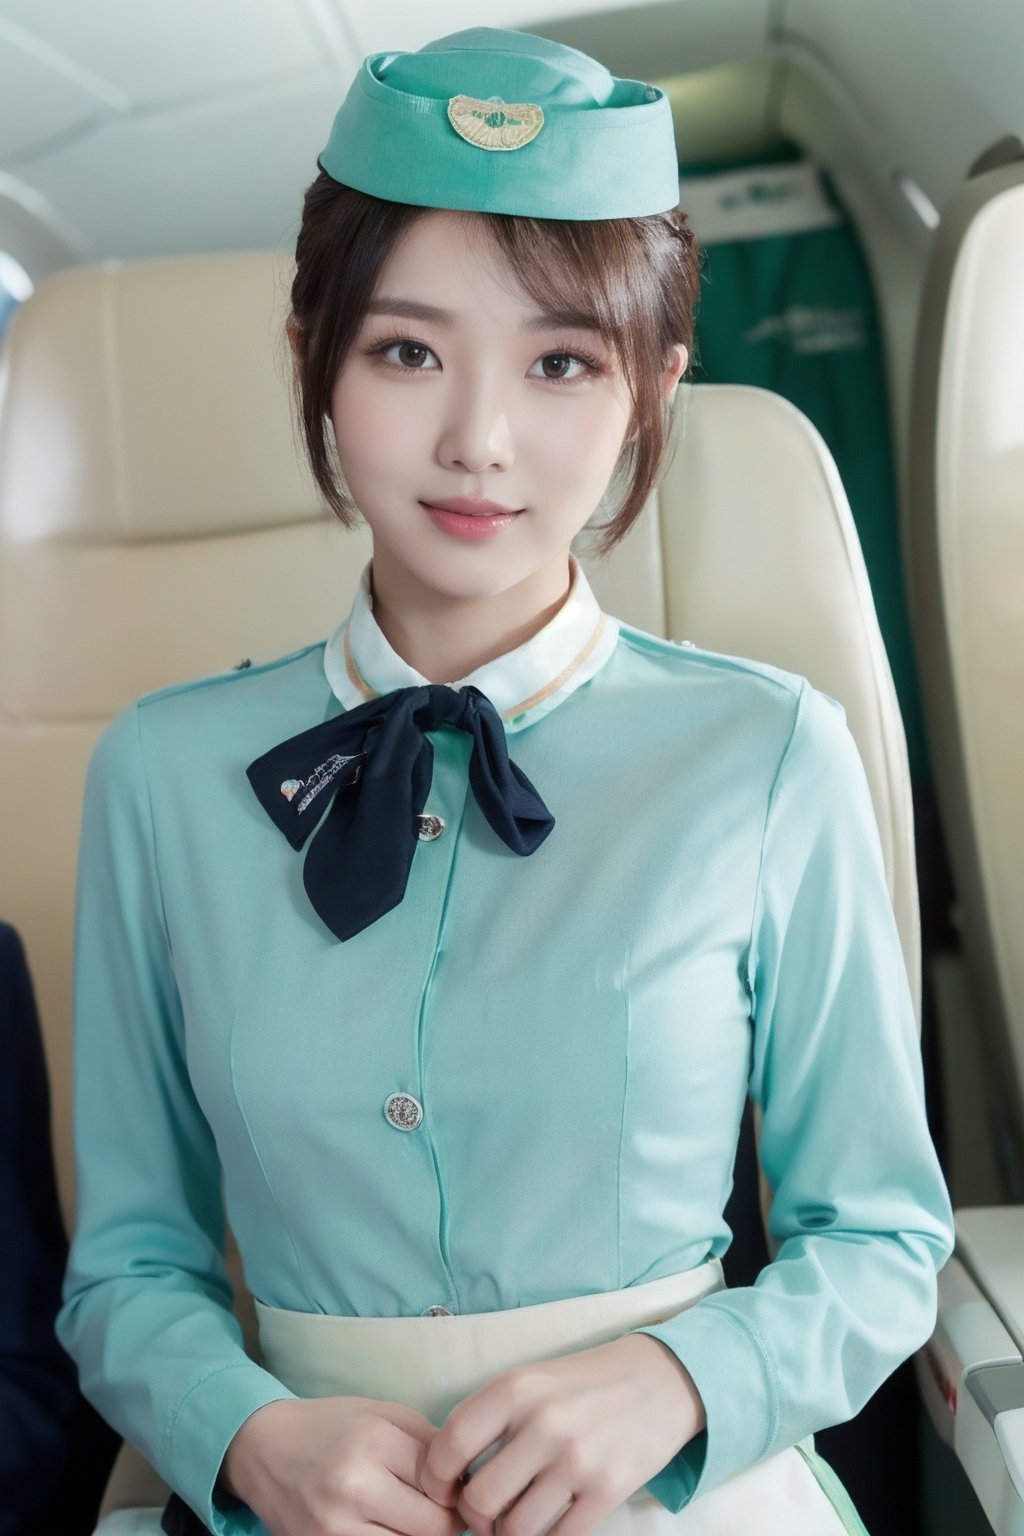 Close up to everything, 16K UHD, (life style:1.4), A french-Taiwanese beautiful Stewardess, super idol face, 24 years old, detailed face, monolid, (bun short haired:1.4), (long-sleeved turquoise green-bue stewardess shirt , white collar, off-white long skirt, black tie:1.4), laying on a plane seat, the light is very bright, spotlight, masterpiece, high quality,(she is wearing a blue-green Stewardess's side cap:1.6),wanpeng, (black pupils:1.2),Seolah,better_hands,Asia,1 girl ,Woman ,solo,imutbgtbos, (full_body shot:1.2)